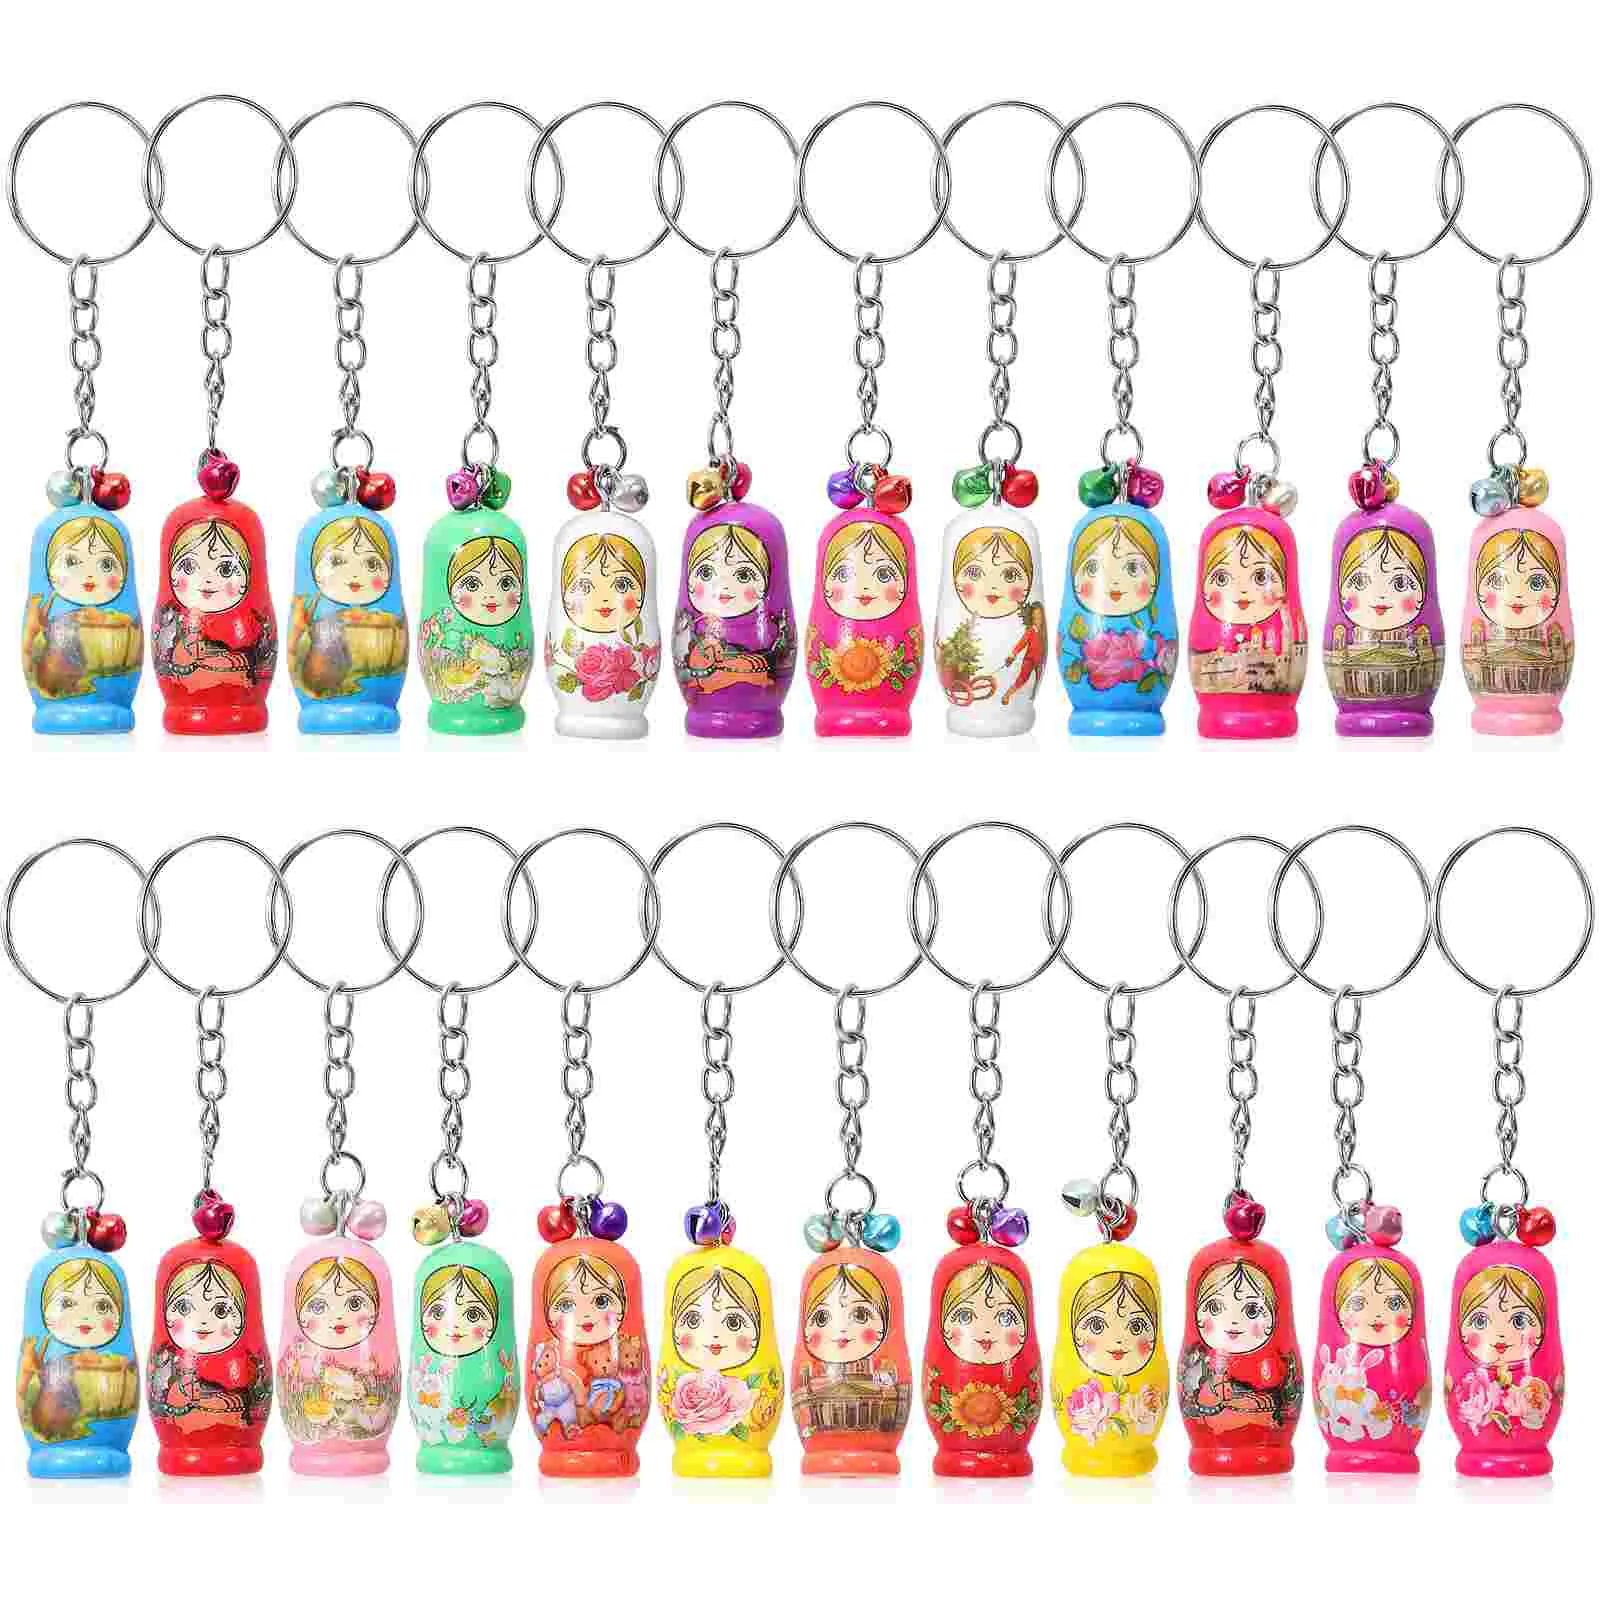 

Russian Nesting Dolls Keychains with Small Bells Russian Dolls Pendants Key Rings Creative Keychains Charm Decors